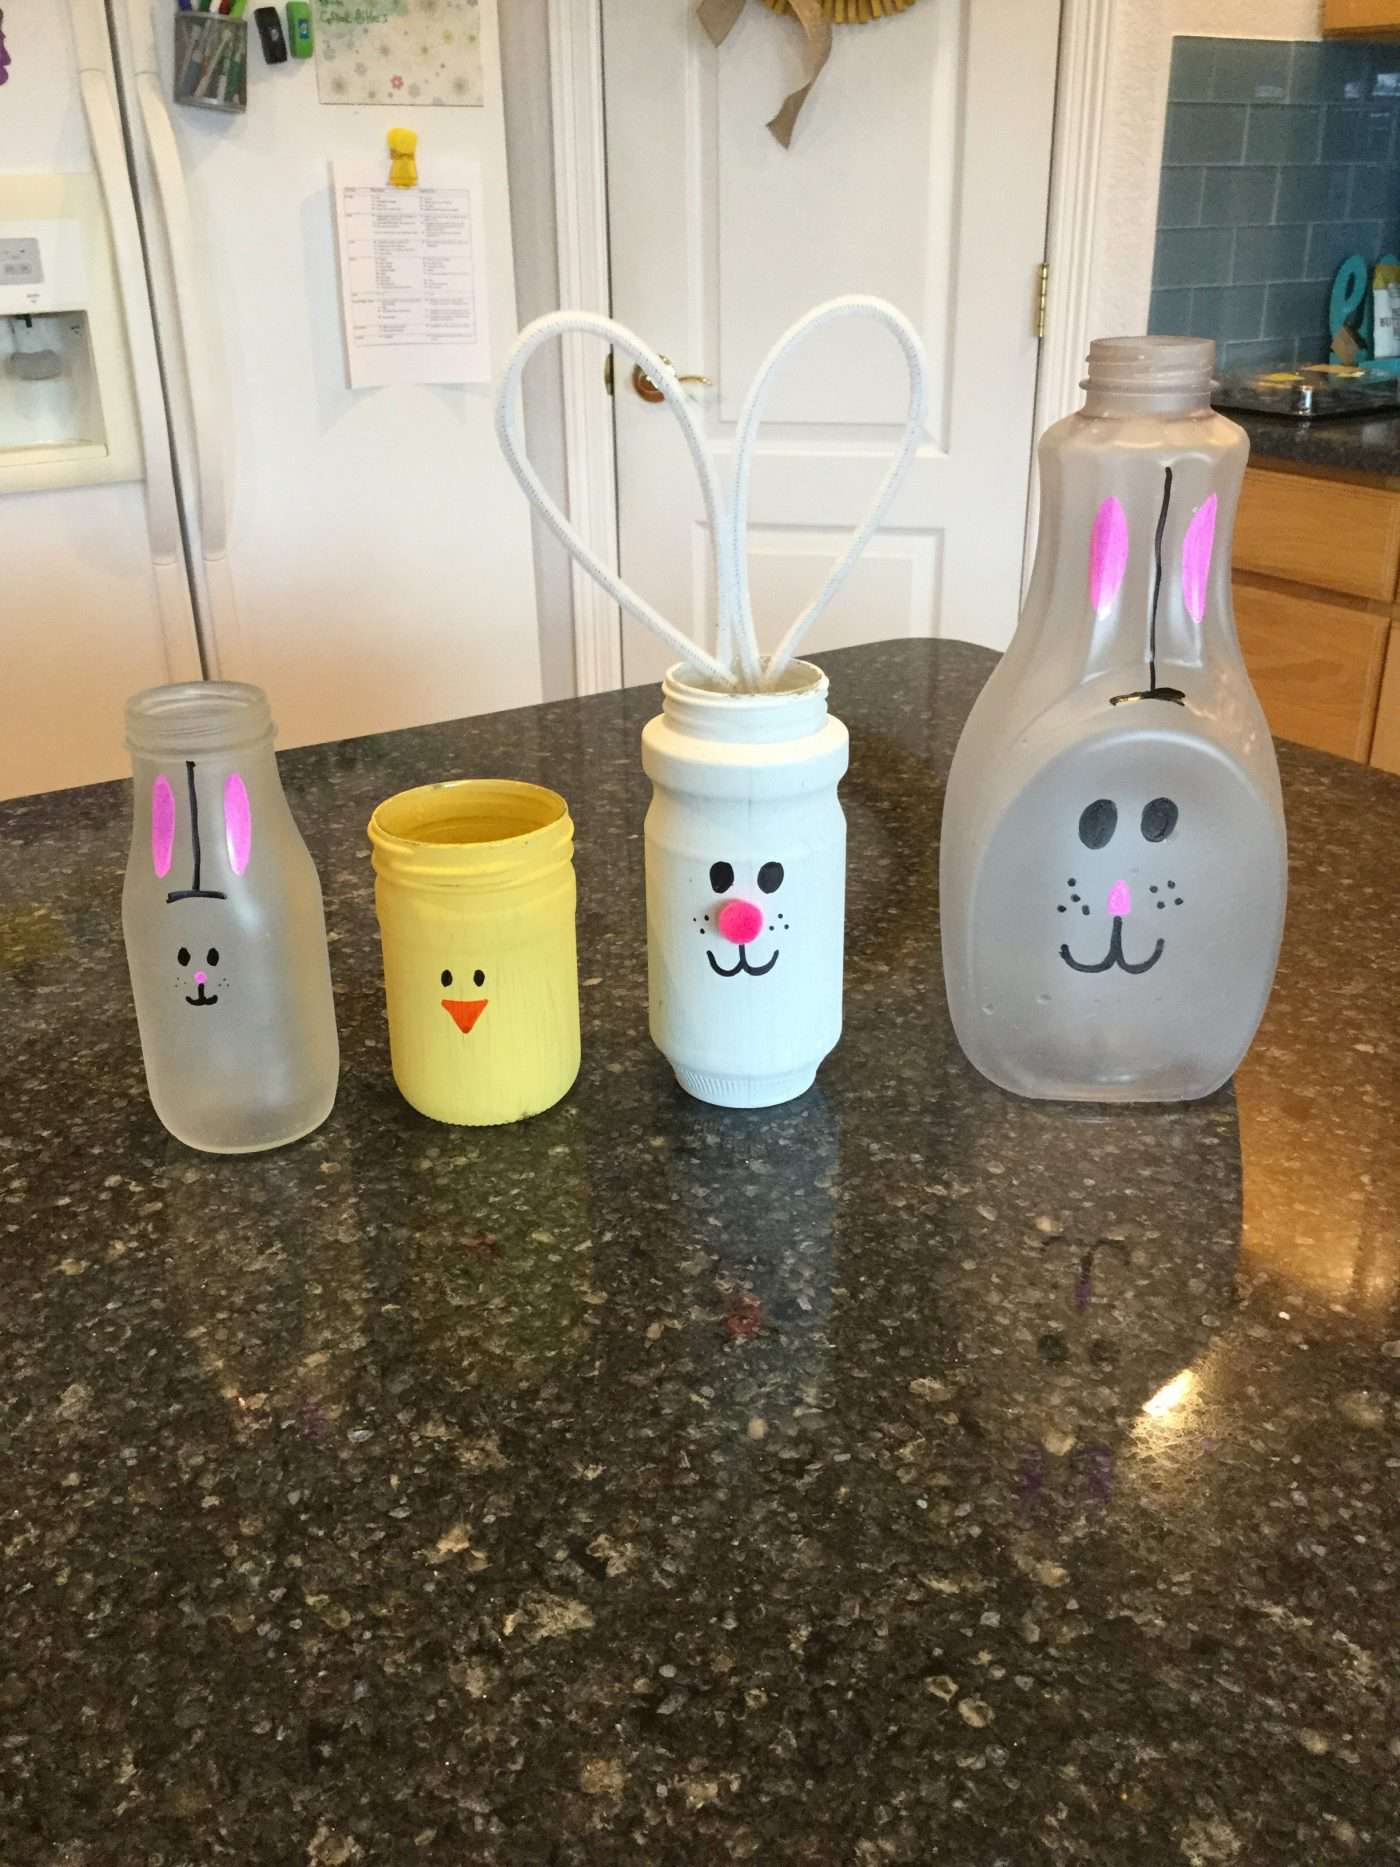 I wanted to share how I used some recycled jars to turn them in to spring decor - bunnies and chicks!  It's easy and great fun for the kids too!